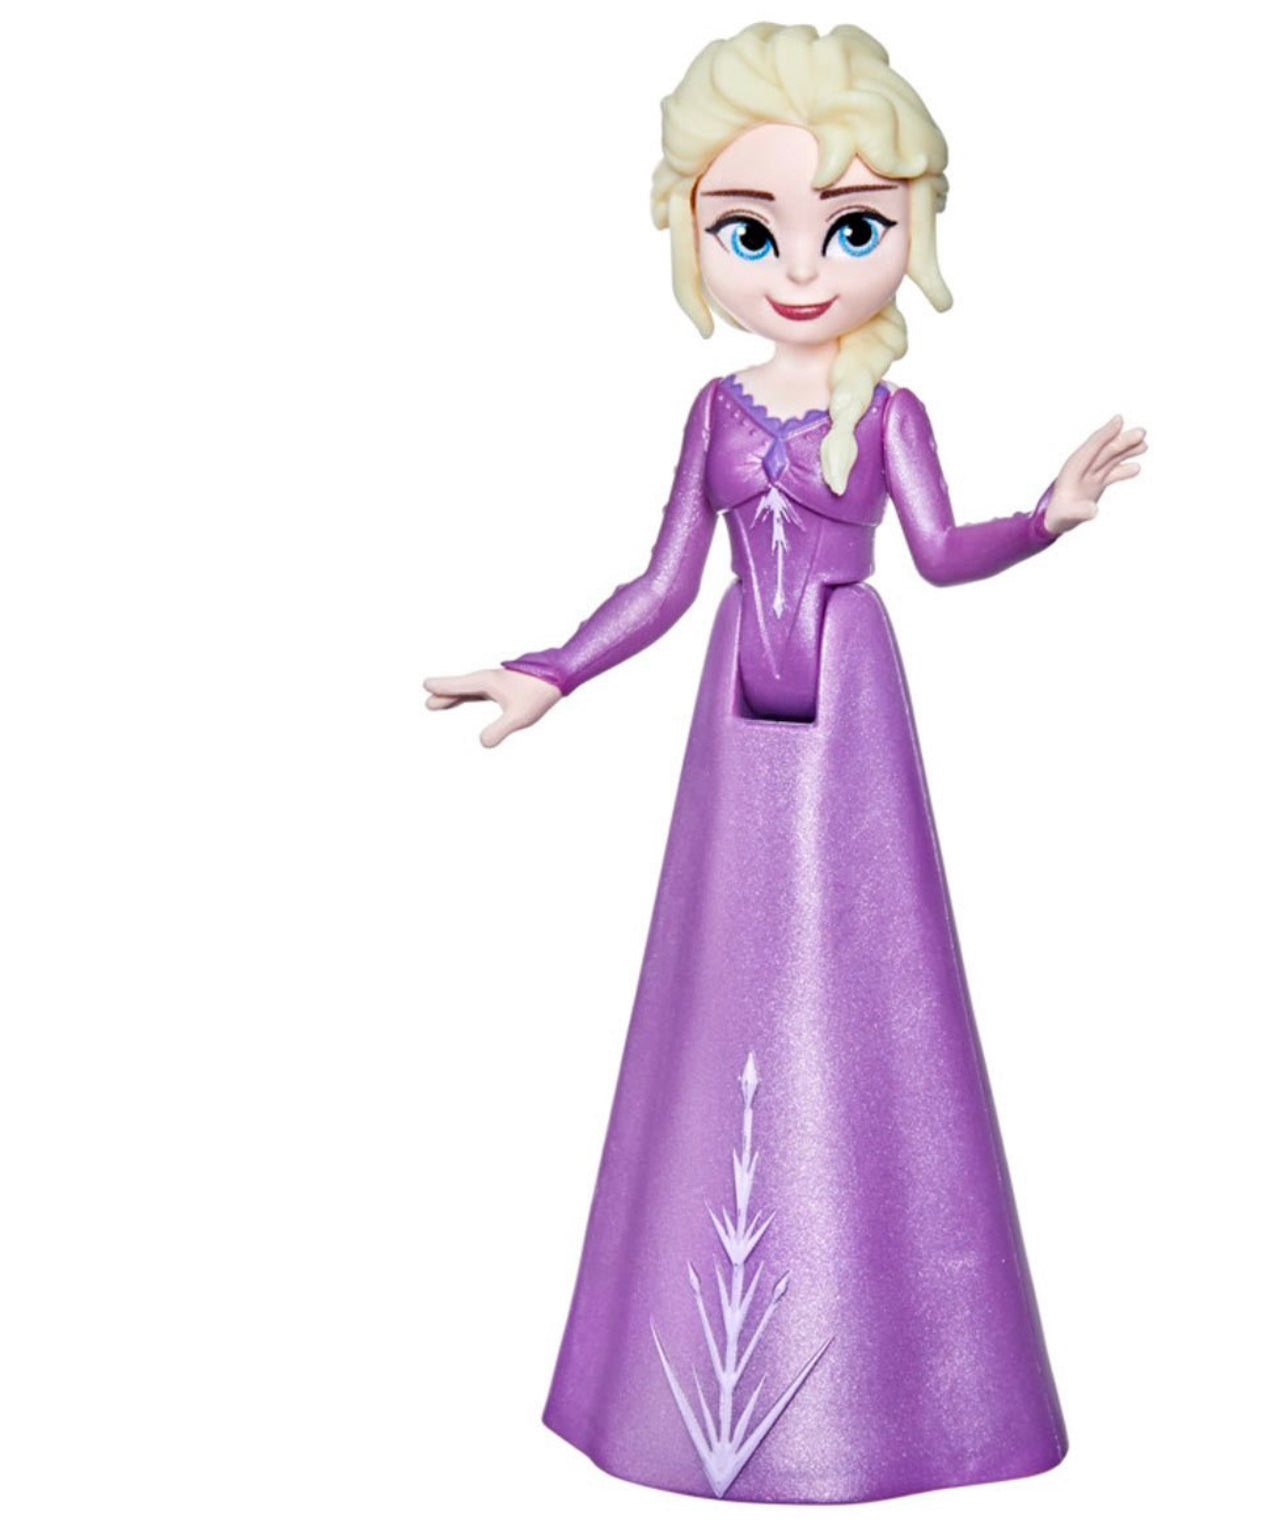 Elsa the Snow Queen is the deuteragonist of Disney's 2013 animated feature film Frozen and the protagonist of its 2019 sequel. 